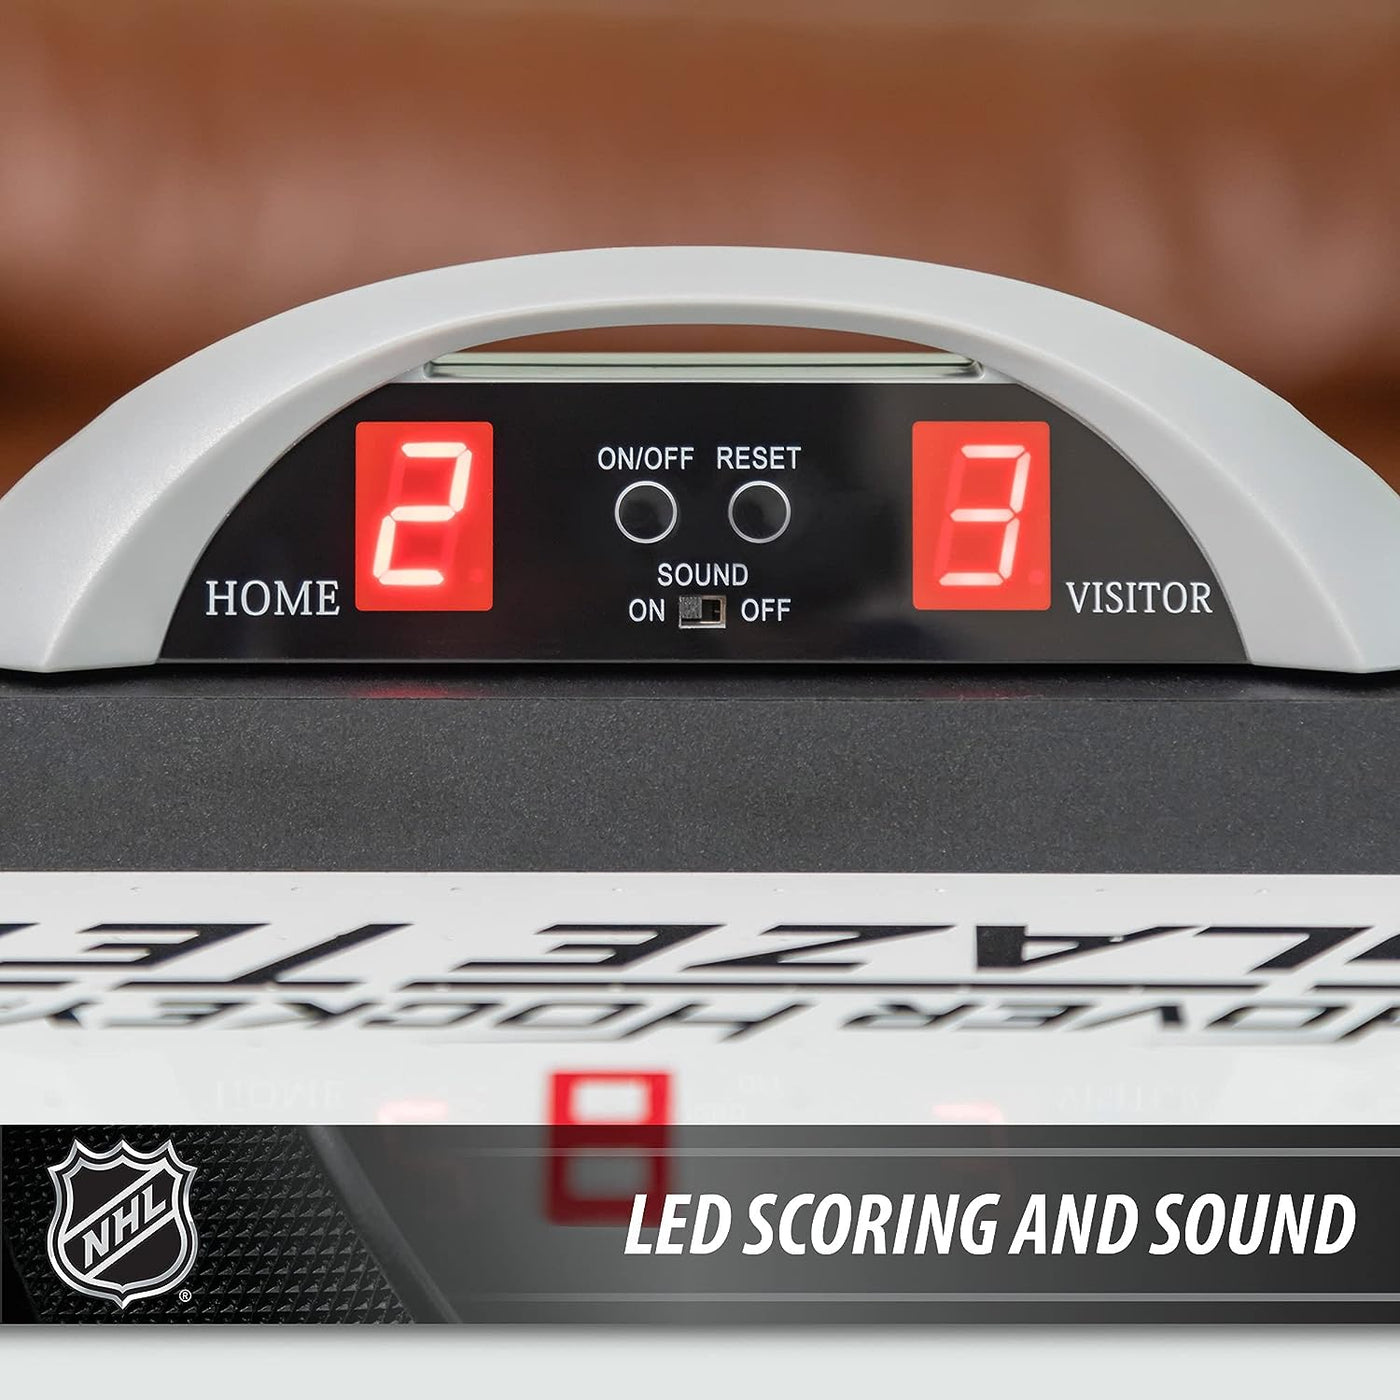 NHL Air Hockey Game Tables by EastPoint Sports - 80" Air Powered Hockey Table - $450